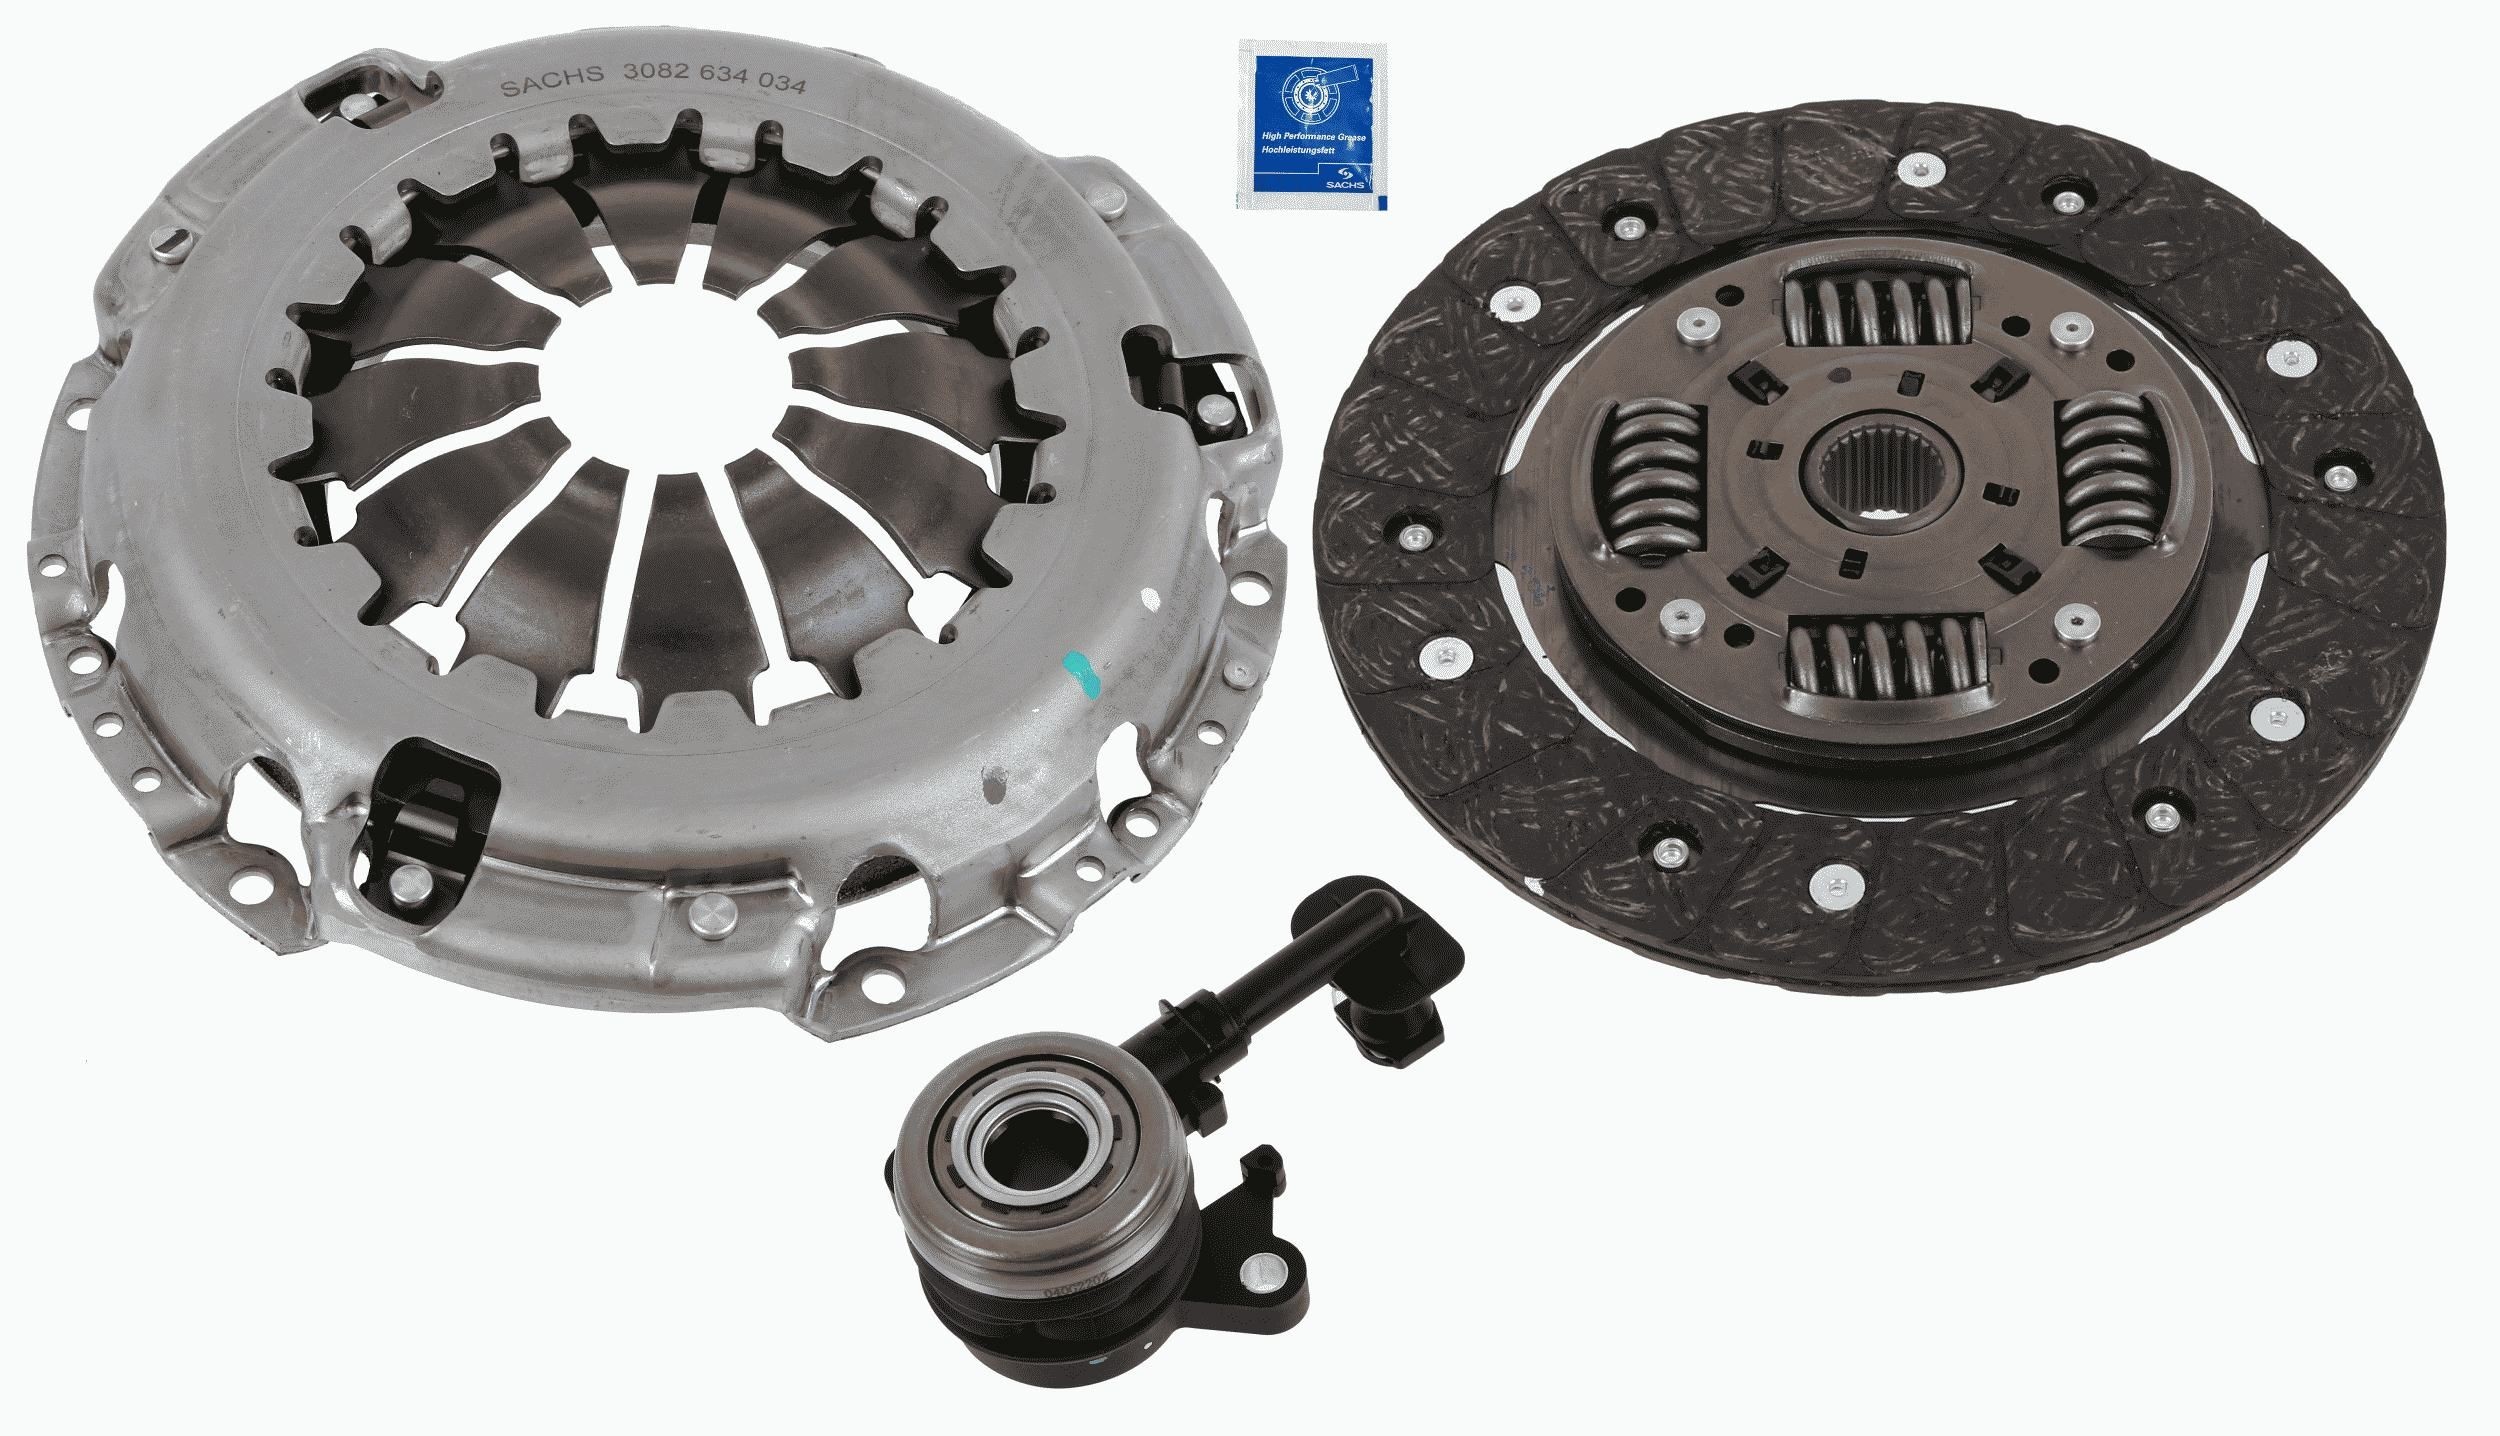 Original SACHS Clutch replacement kit 3000 990 572 for DACIA DUSTER